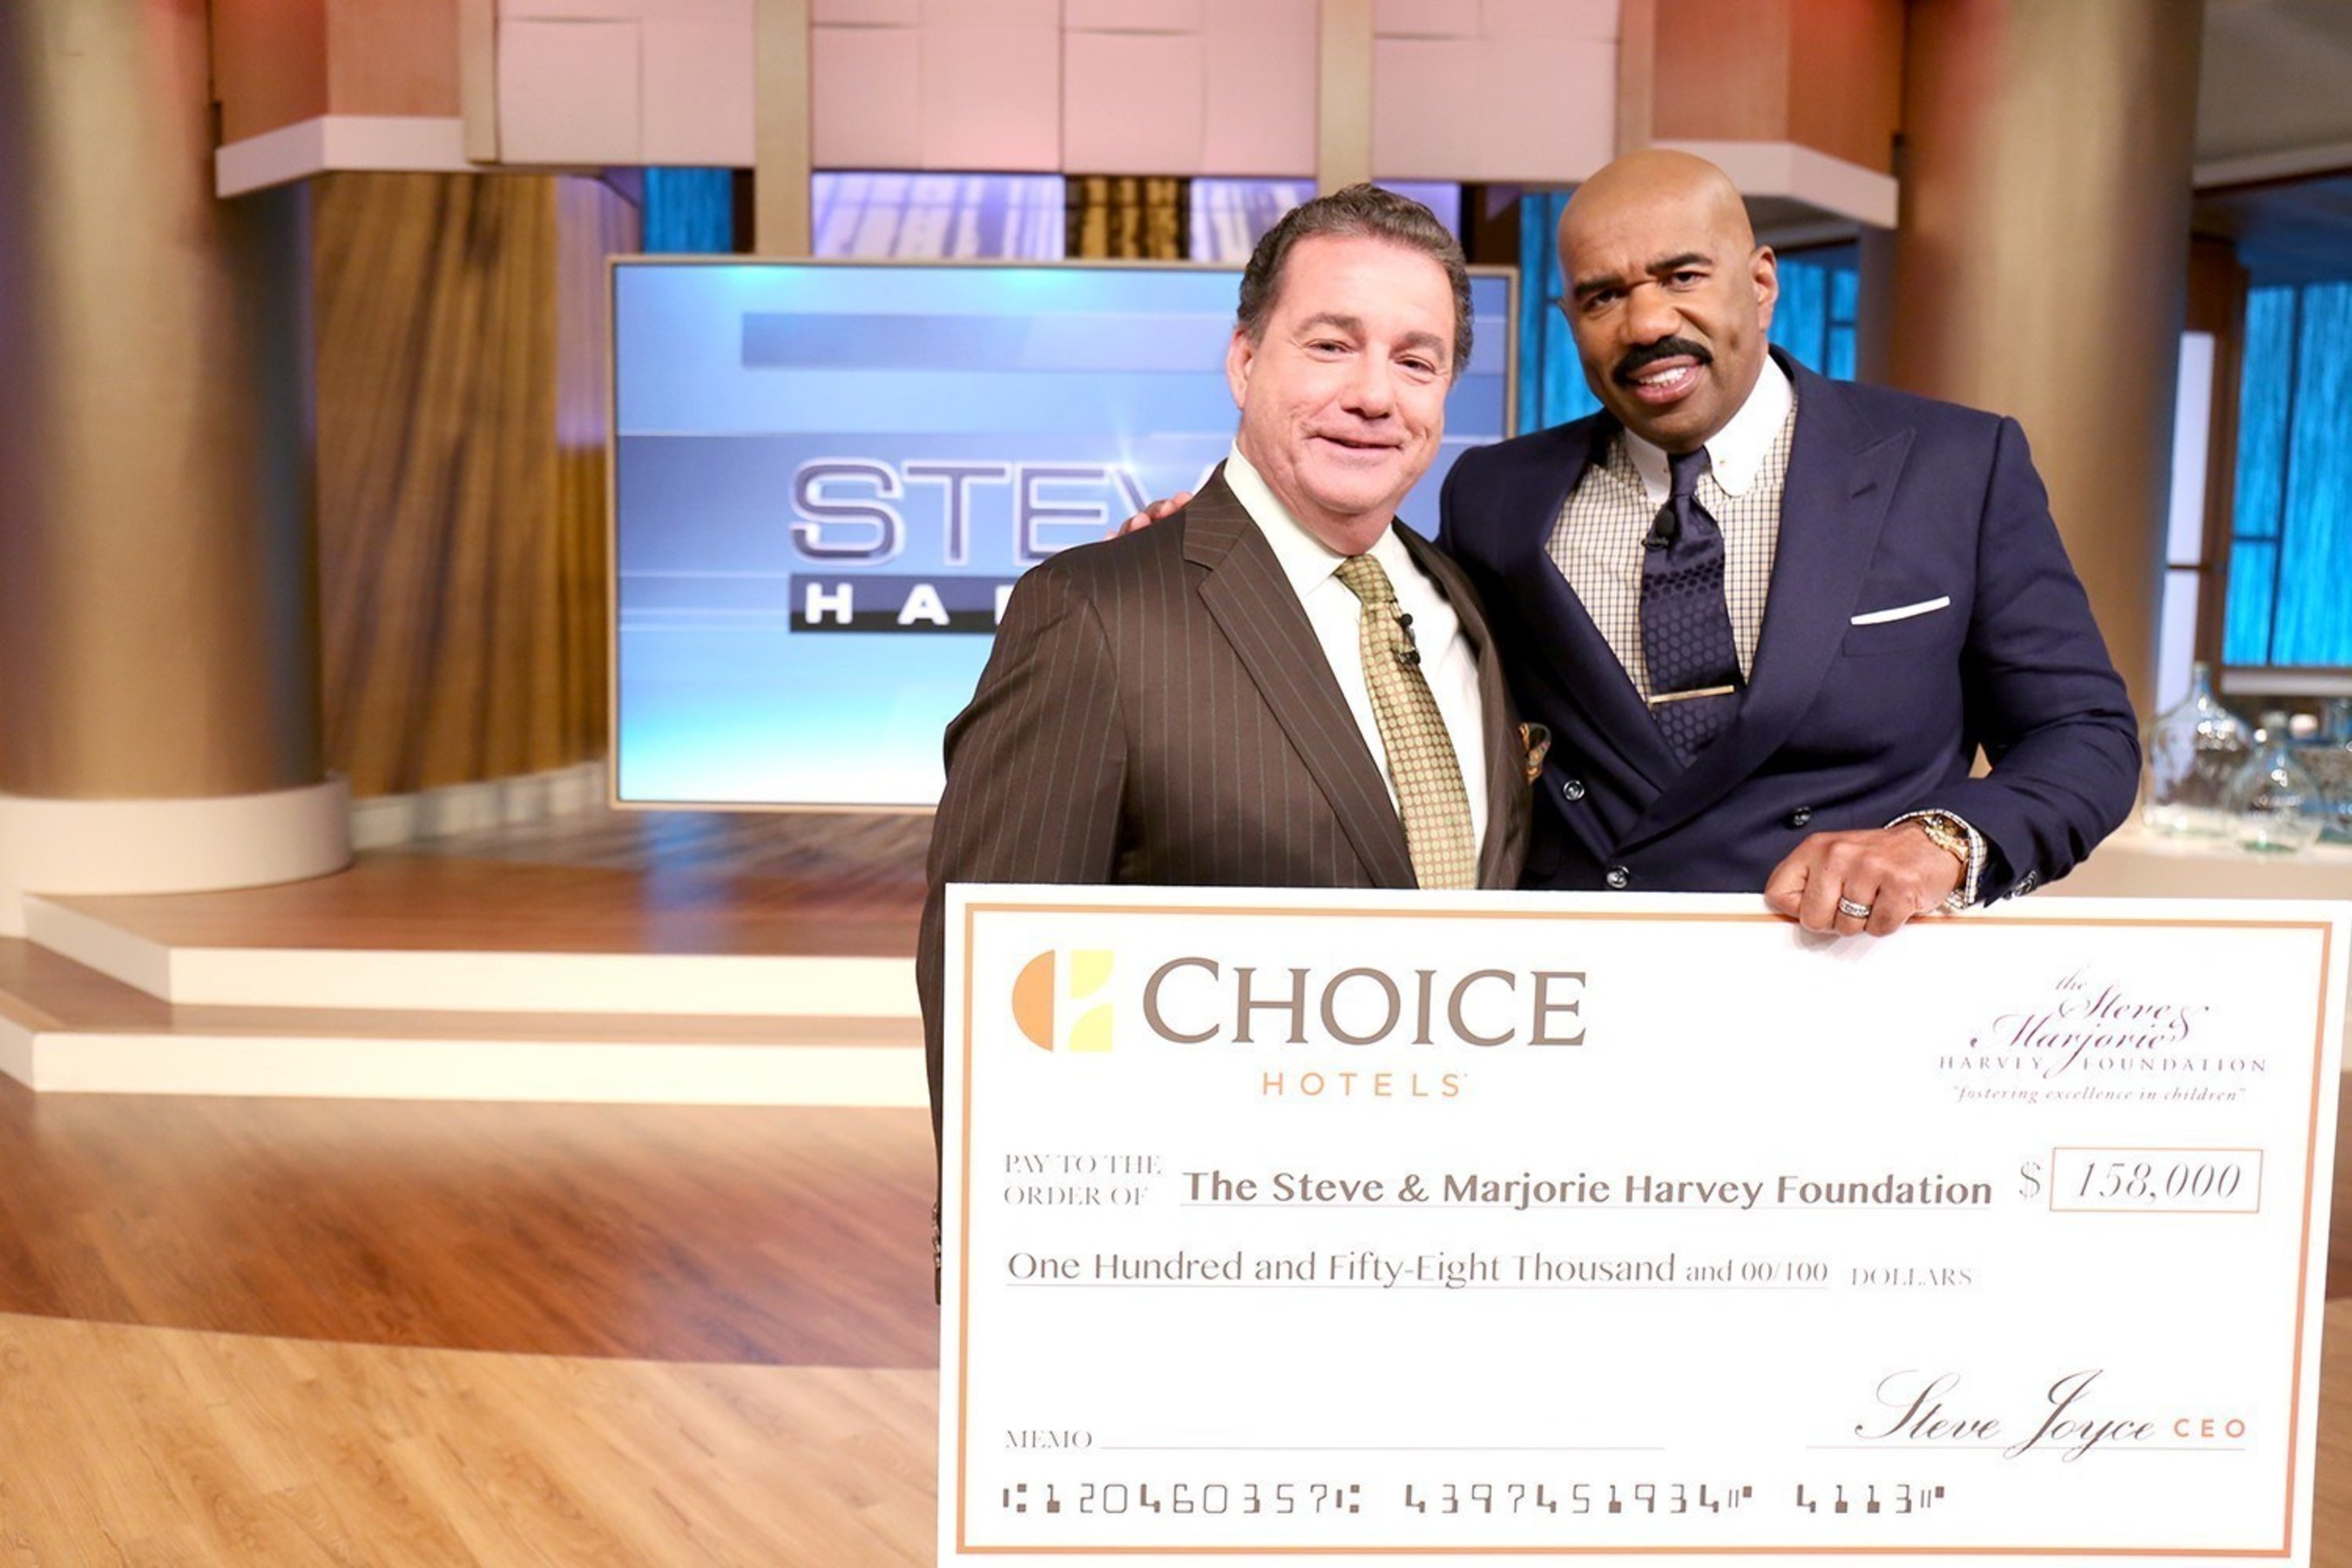 Choice Hotels President and CEO presents donation for the Steve & Marjorie Harvey Foundation